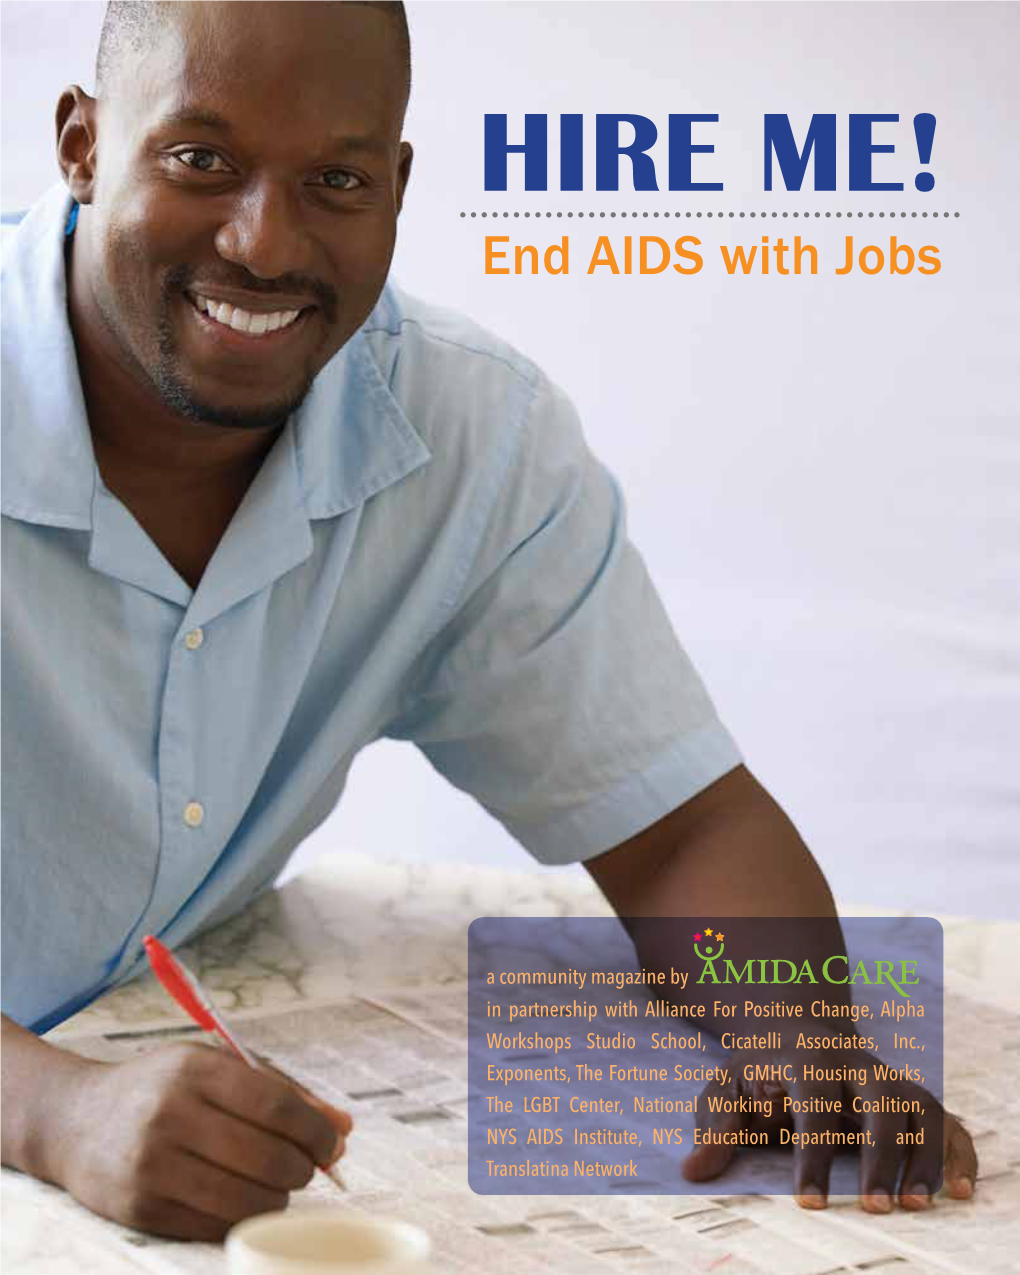 HIRE ME! End AIDS with Jobs